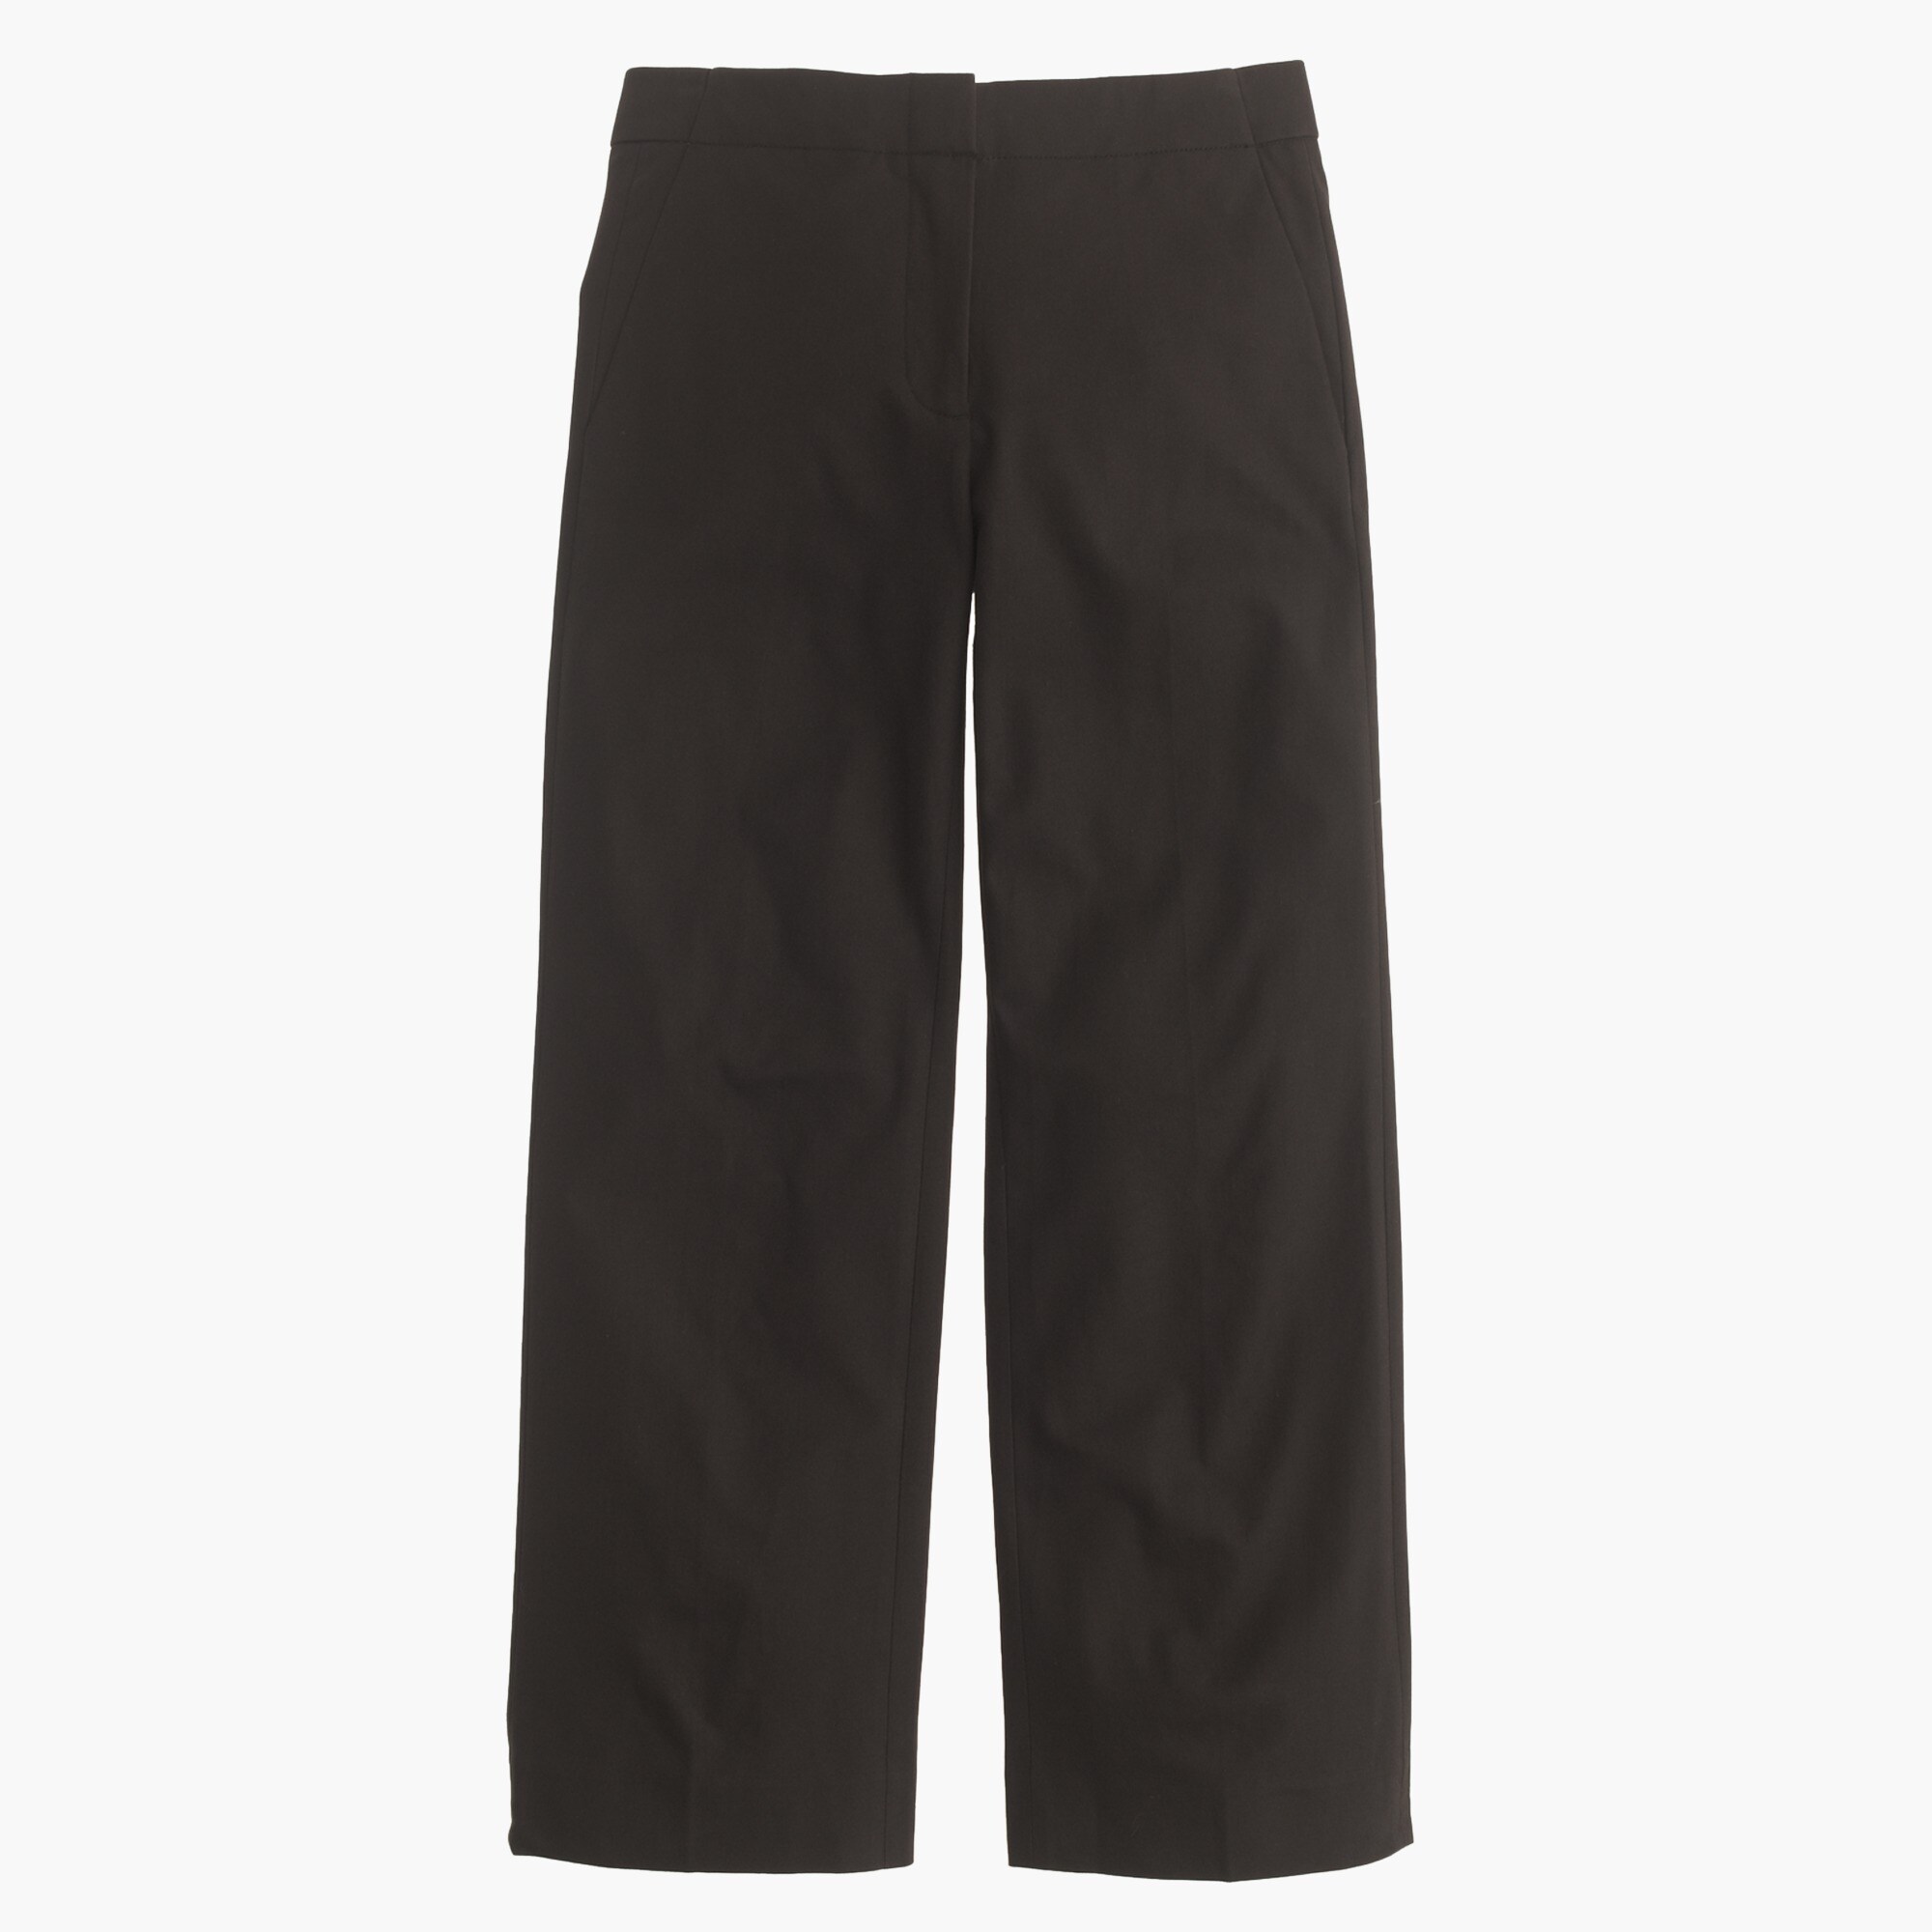 J.Crew Tall Maddie Pant In Two Way Stretch Cotton, $89, J.Crew